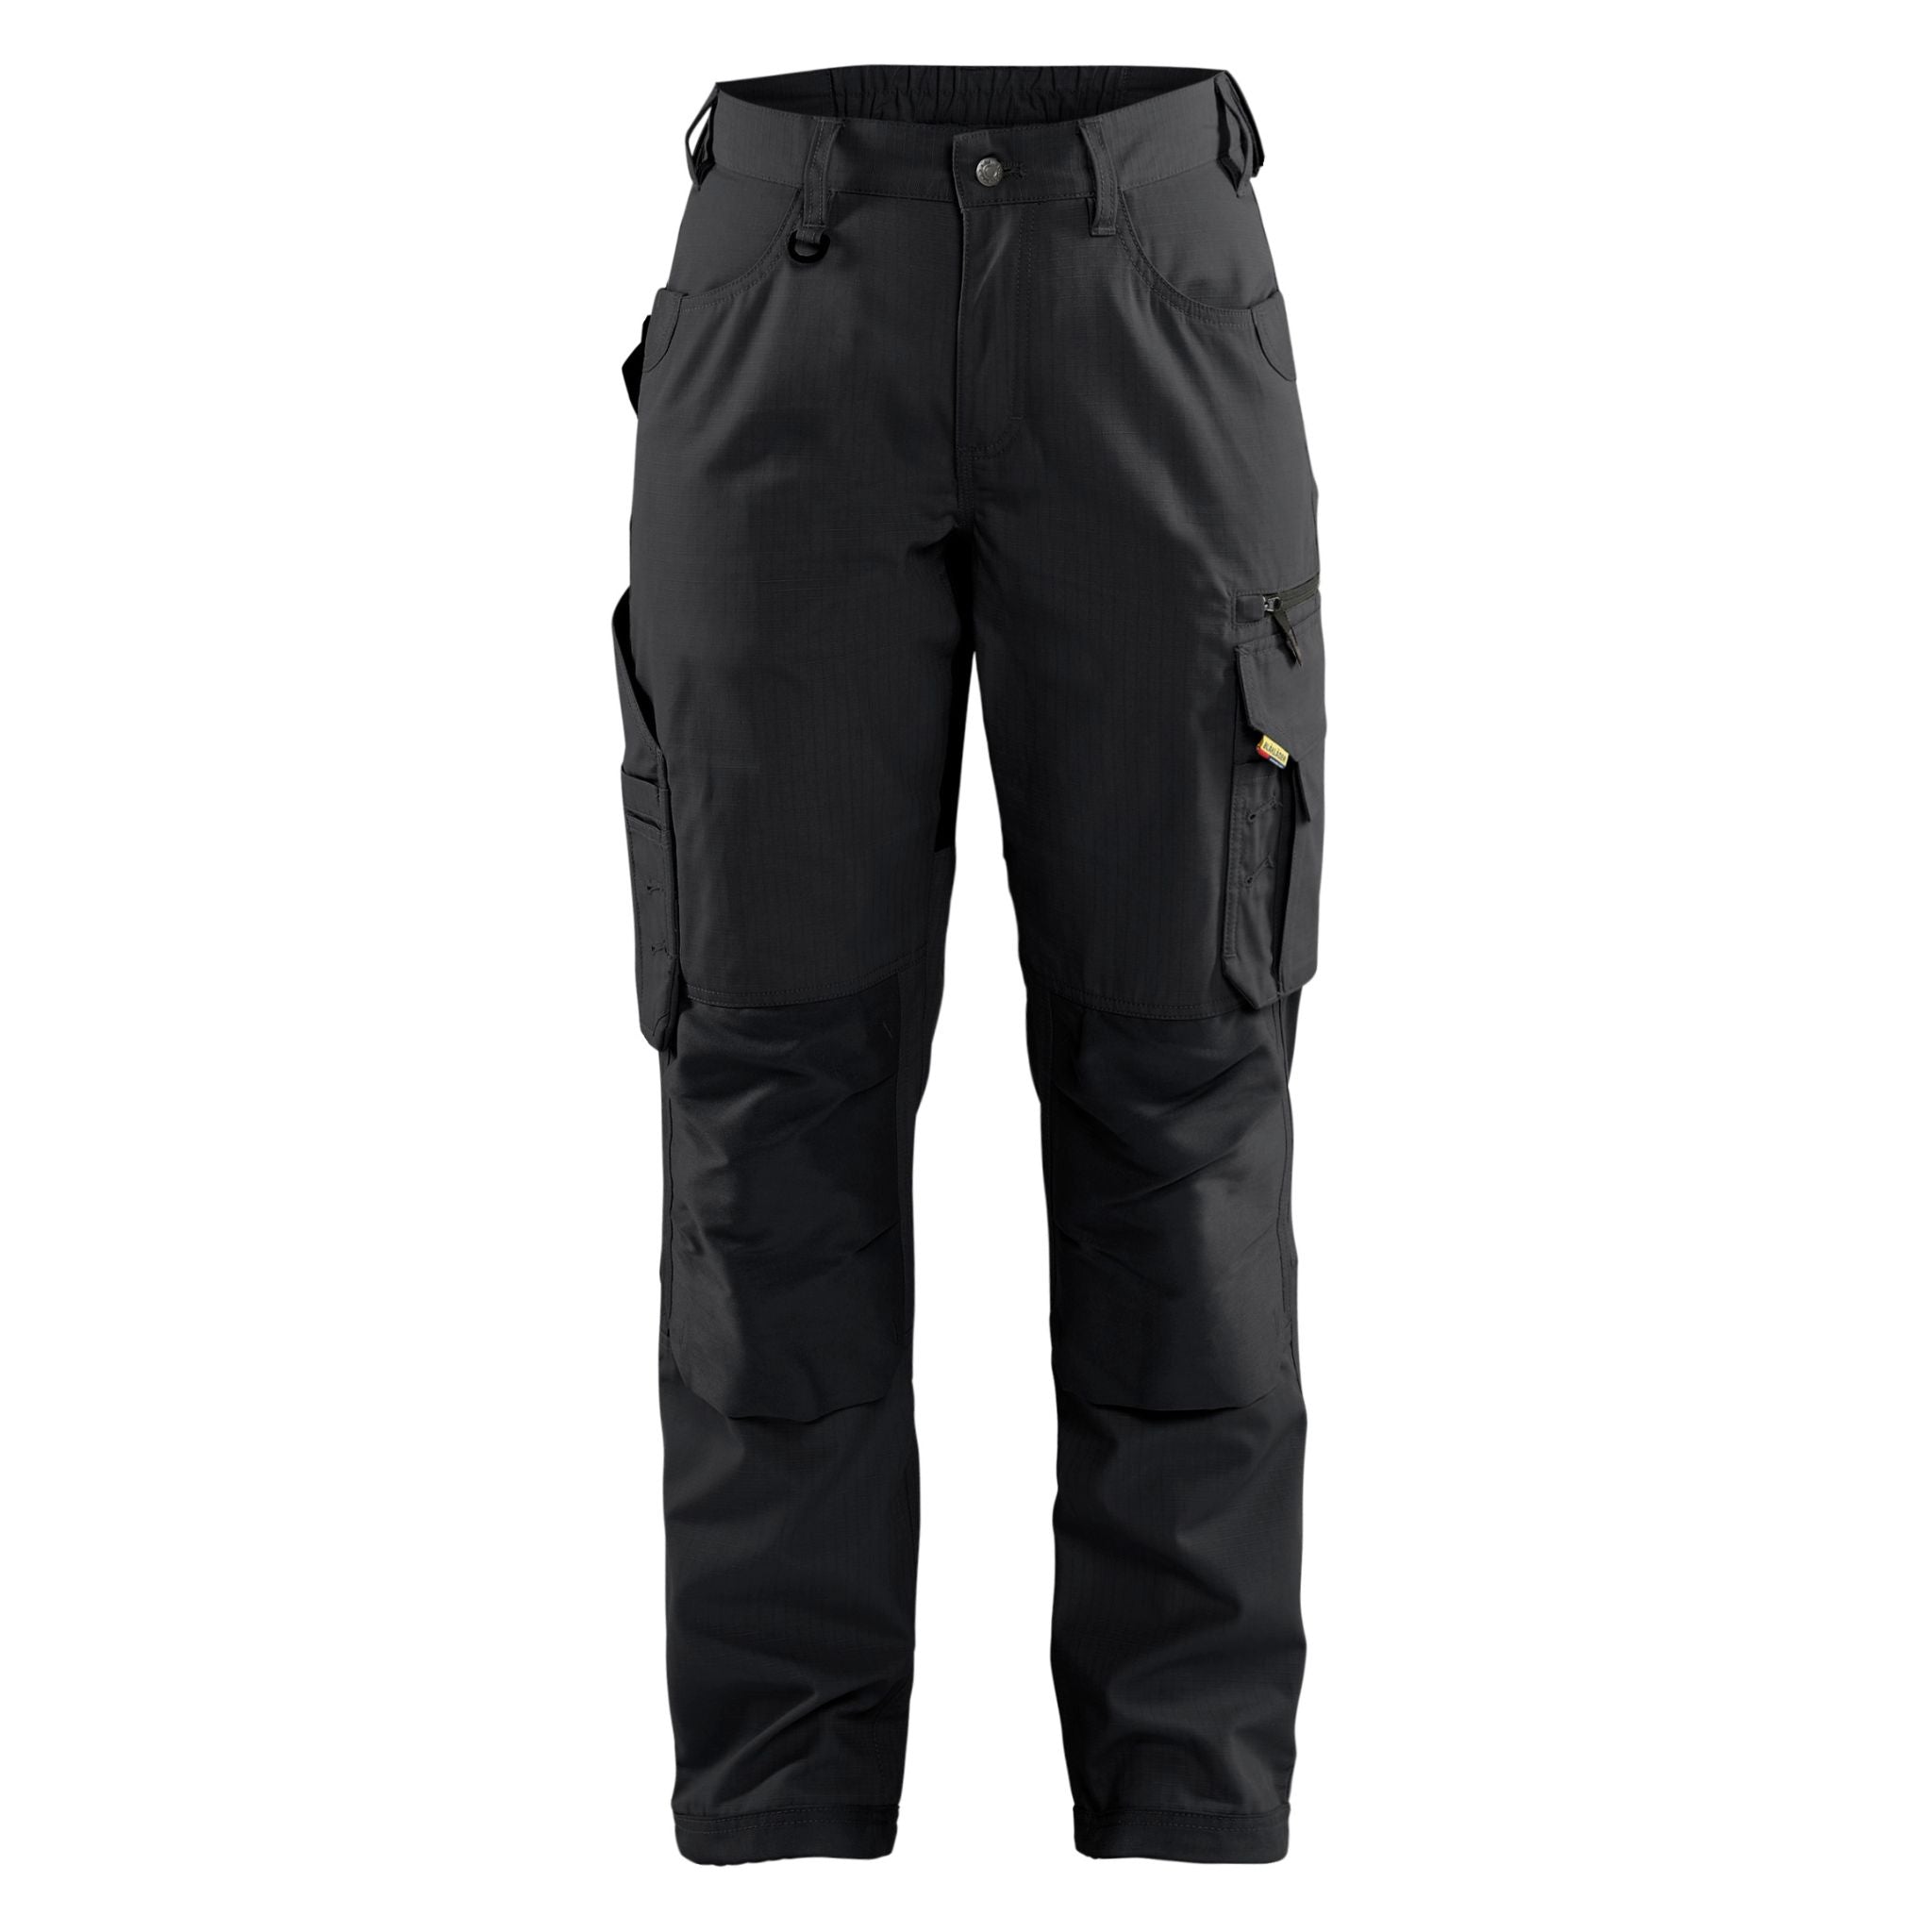 Women's show black work pants with eleven deep pockets